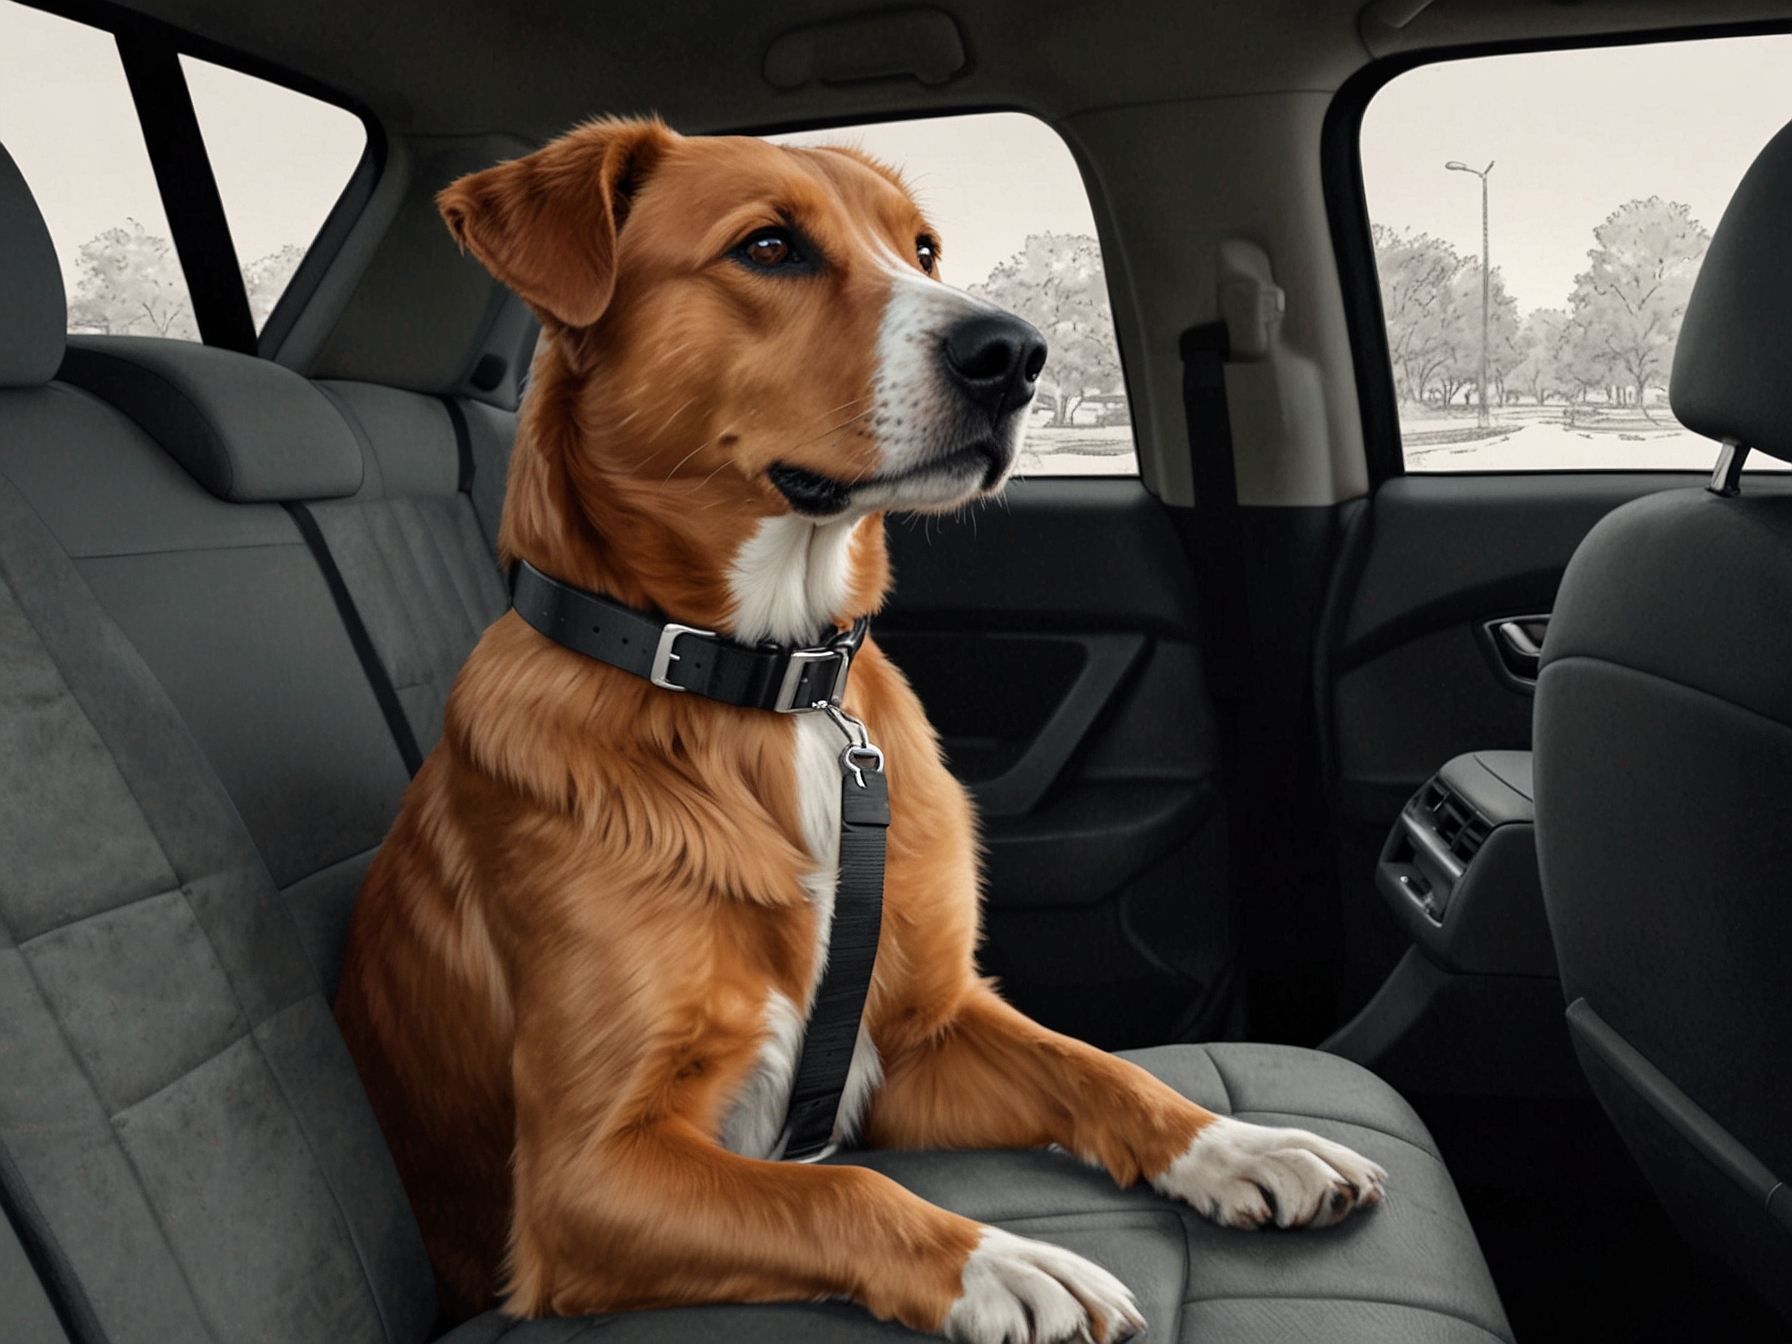 A driver fastening a pet seat belt on a dog in the back seat of a car, emphasizing the importance of securing pets to prevent distractions and ensure passenger safety.